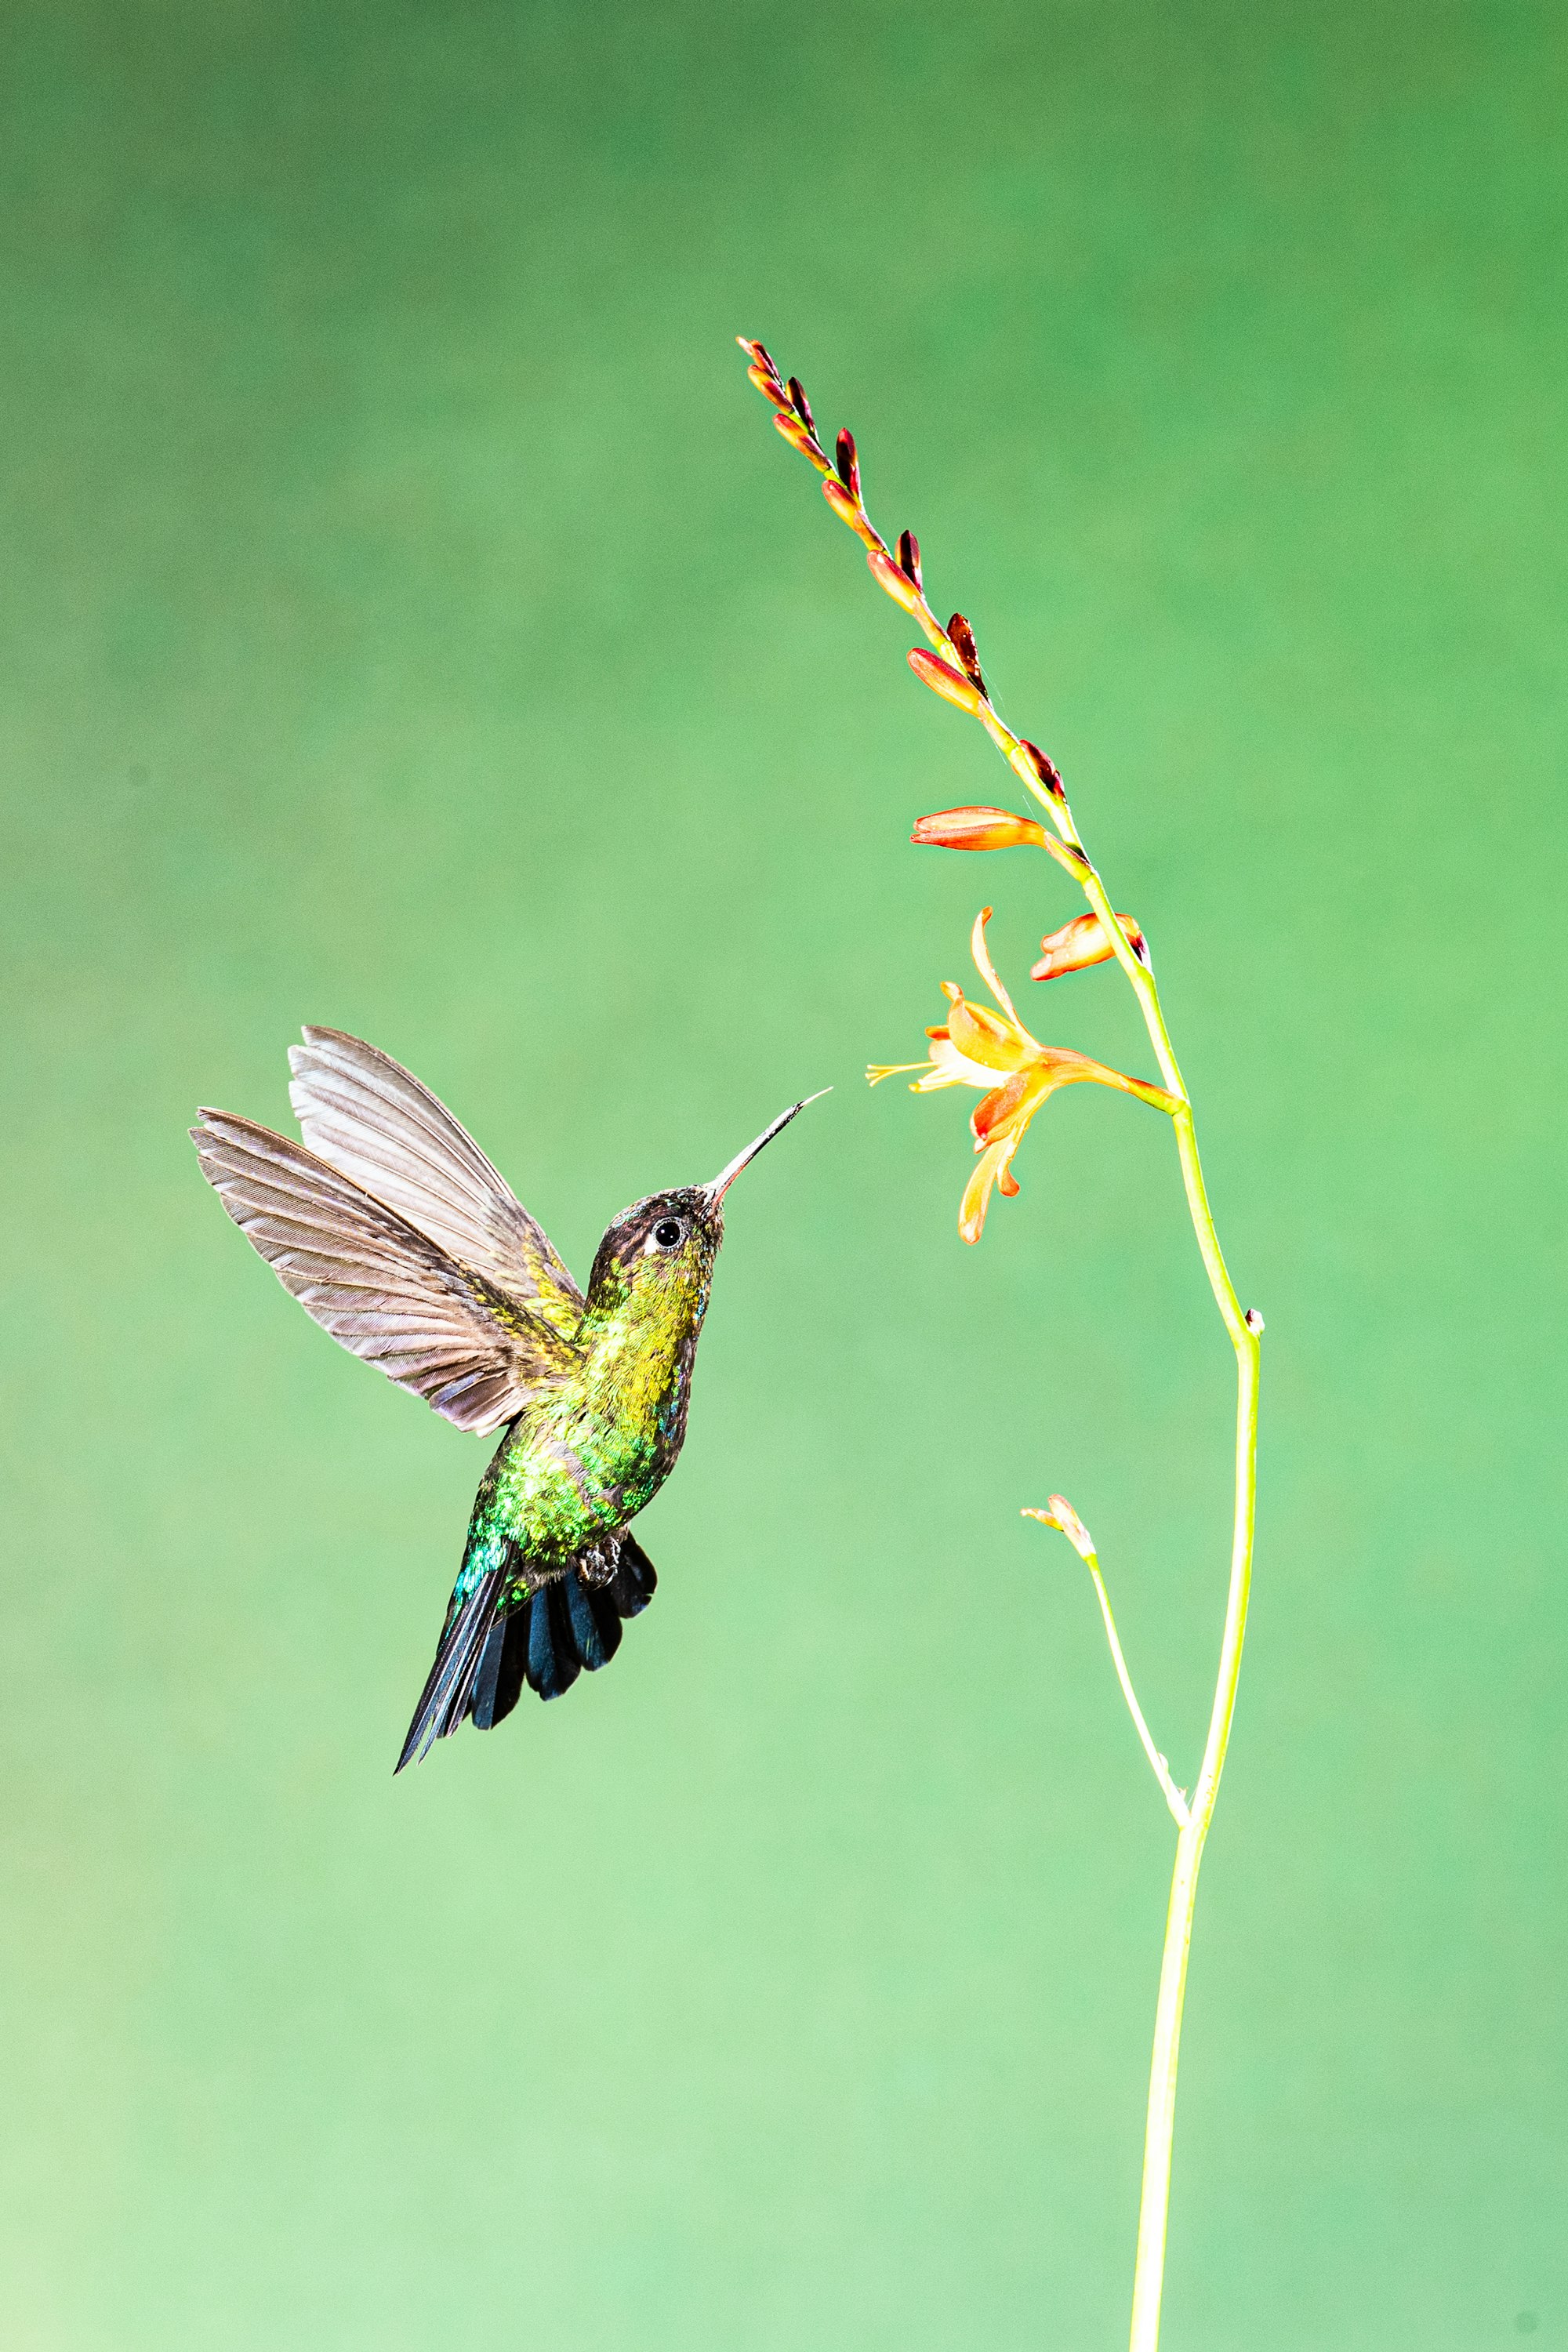 Flying hummingbird with flower and green background